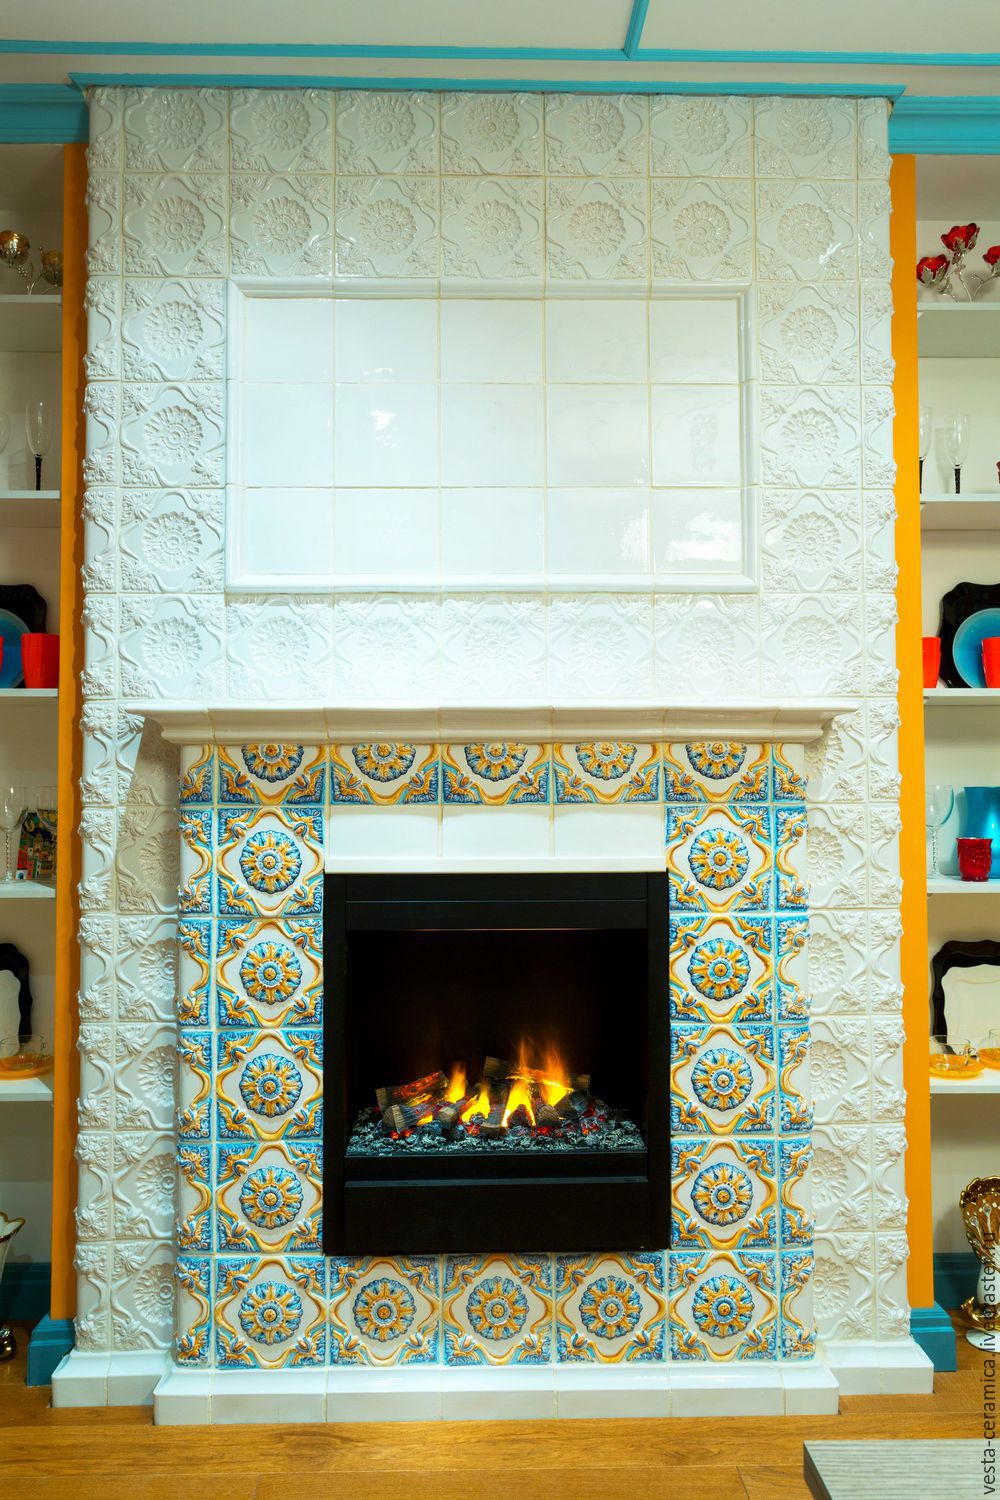 Add Fireplace to House Elegant Tiled Fireplace